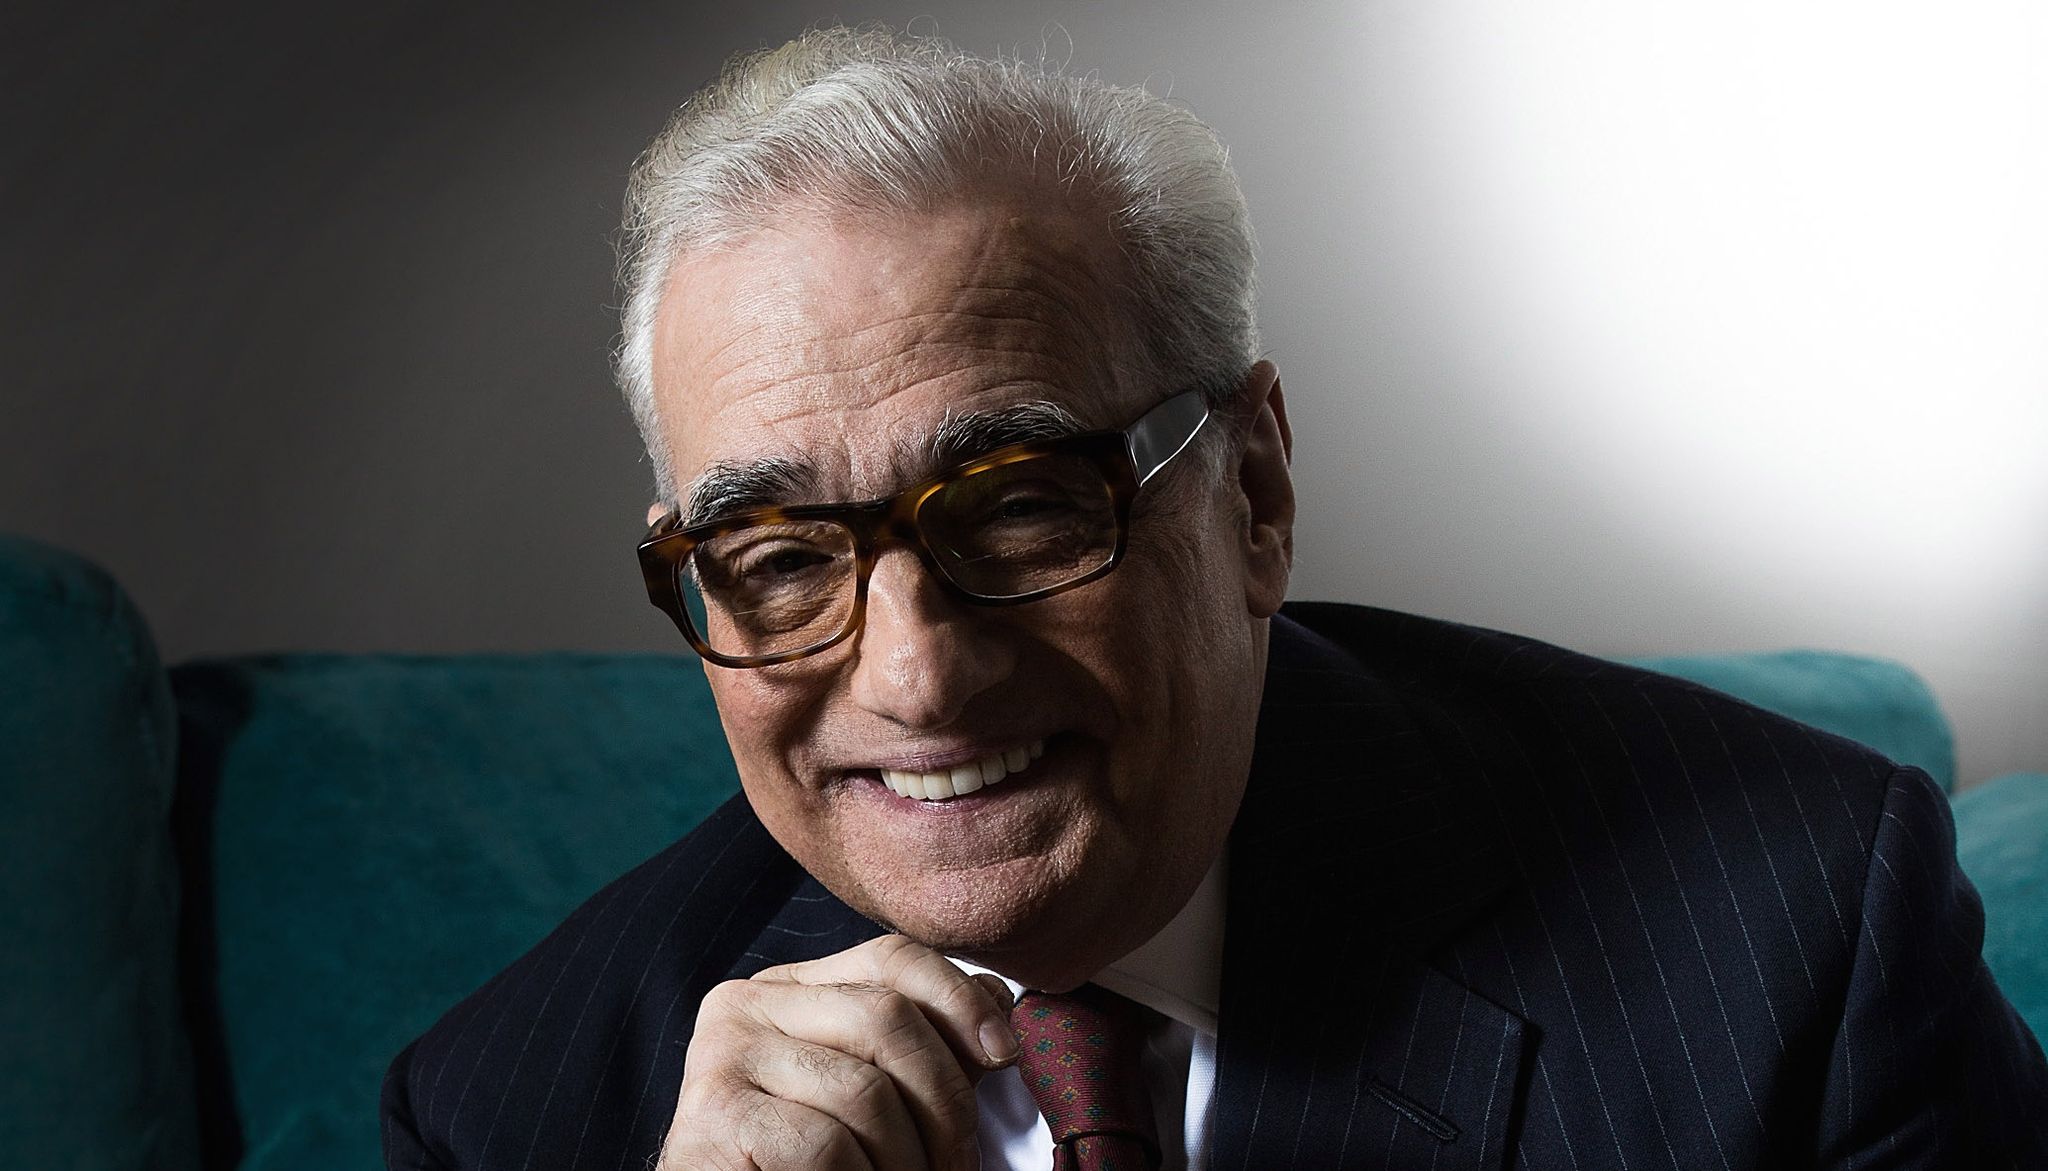 In conversation with Martin Scorsese At The BFI